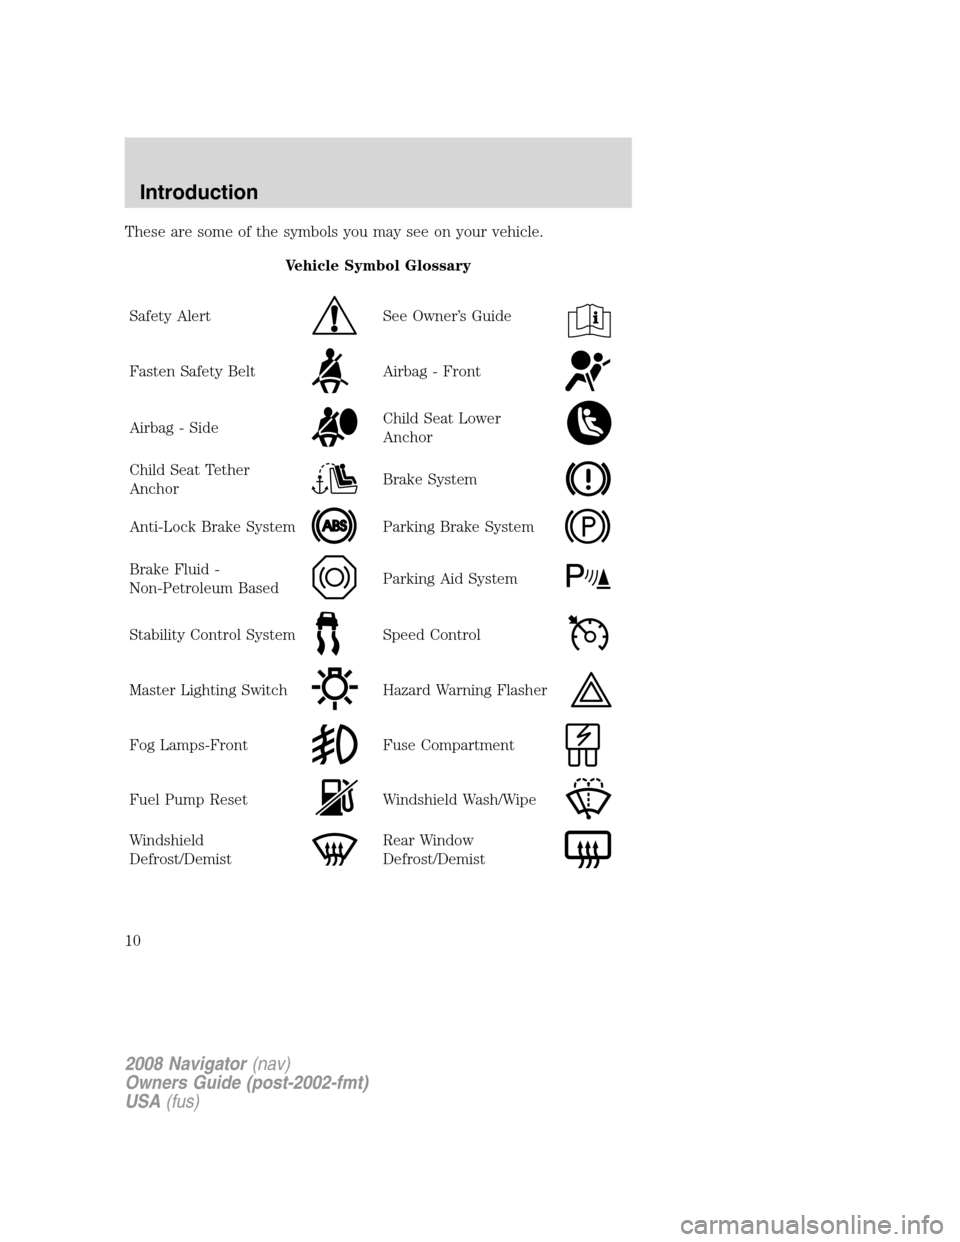 LINCOLN NAVIGATOR 2008  Owners Manual These are some of the symbols you may see on your vehicle.
Vehicle Symbol Glossary
Safety Alert
See Owner’s Guide
Fasten Safety BeltAirbag - Front
Airbag - SideChild Seat Lower
Anchor
Child Seat Tet